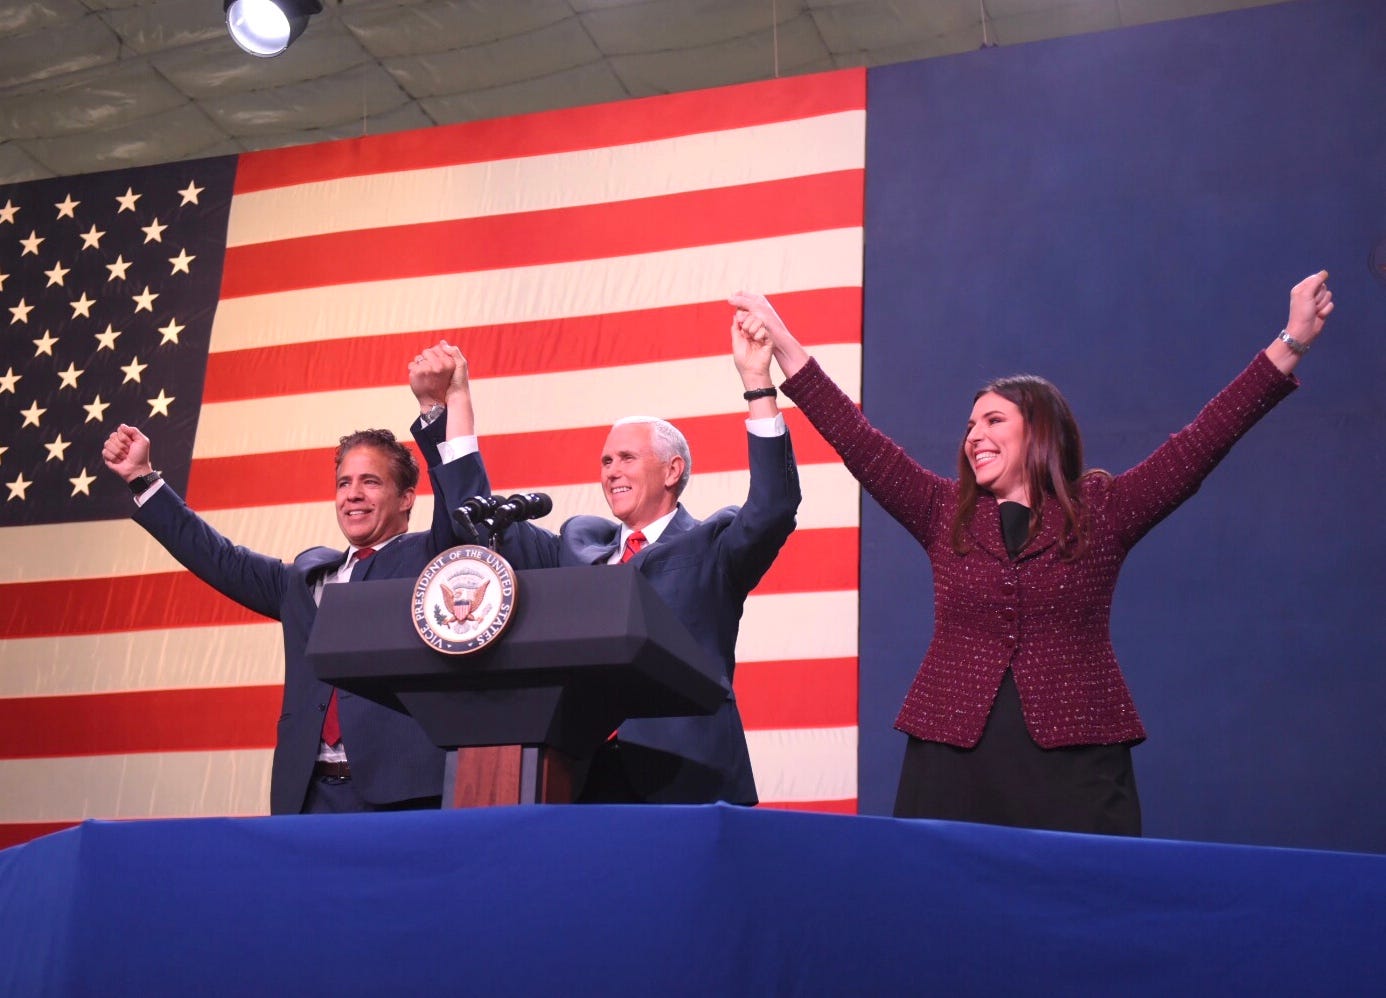 U.S. Rep. Mike Bishop, R-Rochester, Vice President Mike Pence and Lena Epstein, candidate for U.S. Rep. 11th district, join hands during a campaign event Monday at the Oakland County airport in Waterford.